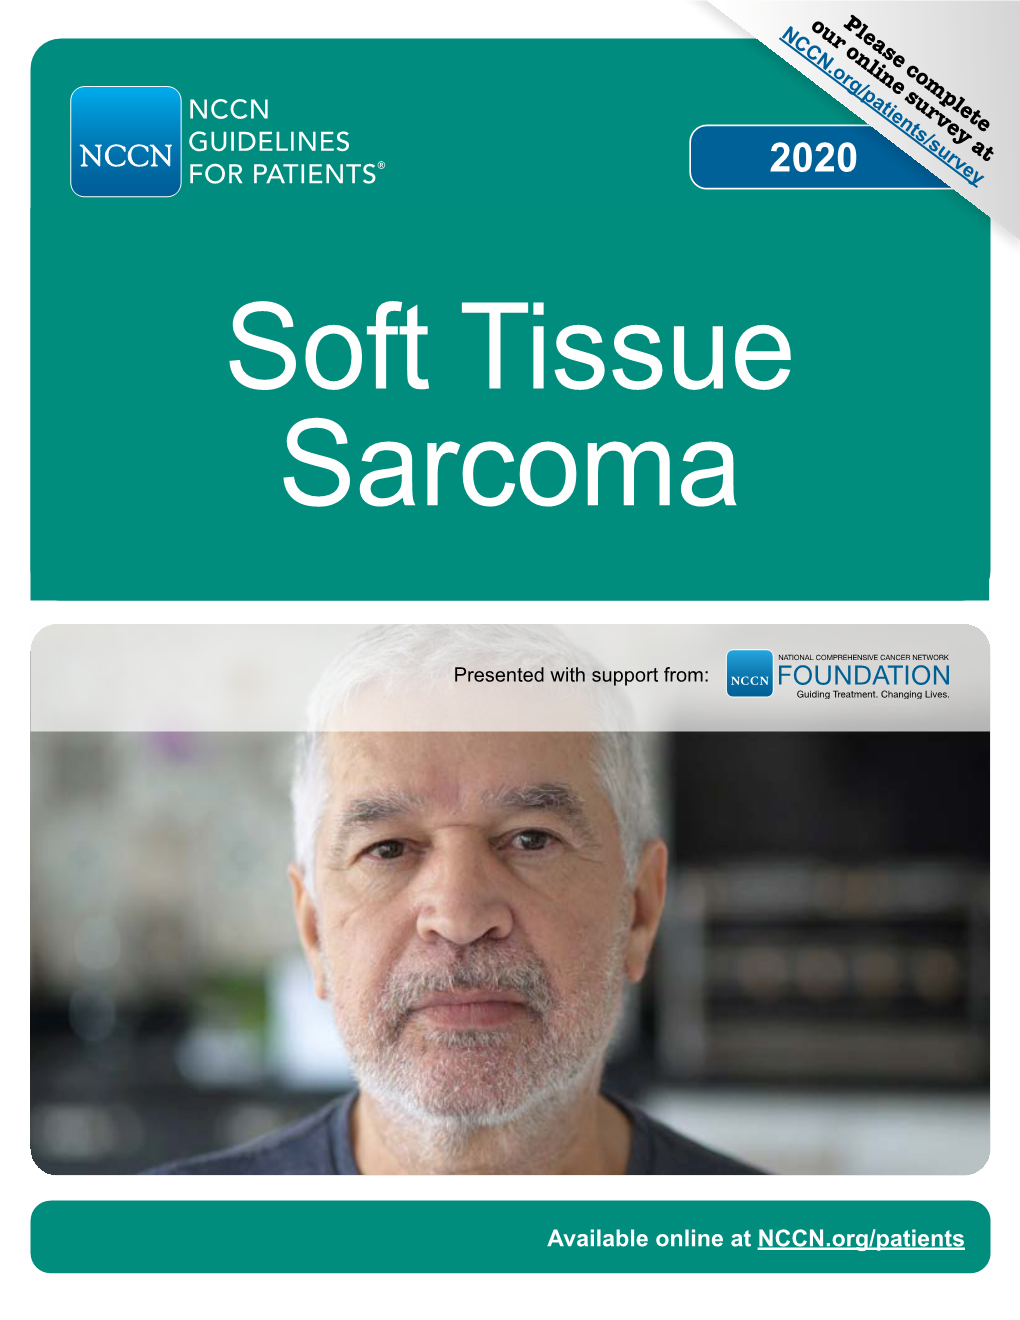 NCCN Patient Guideline for Soft Tissue Sarcoma